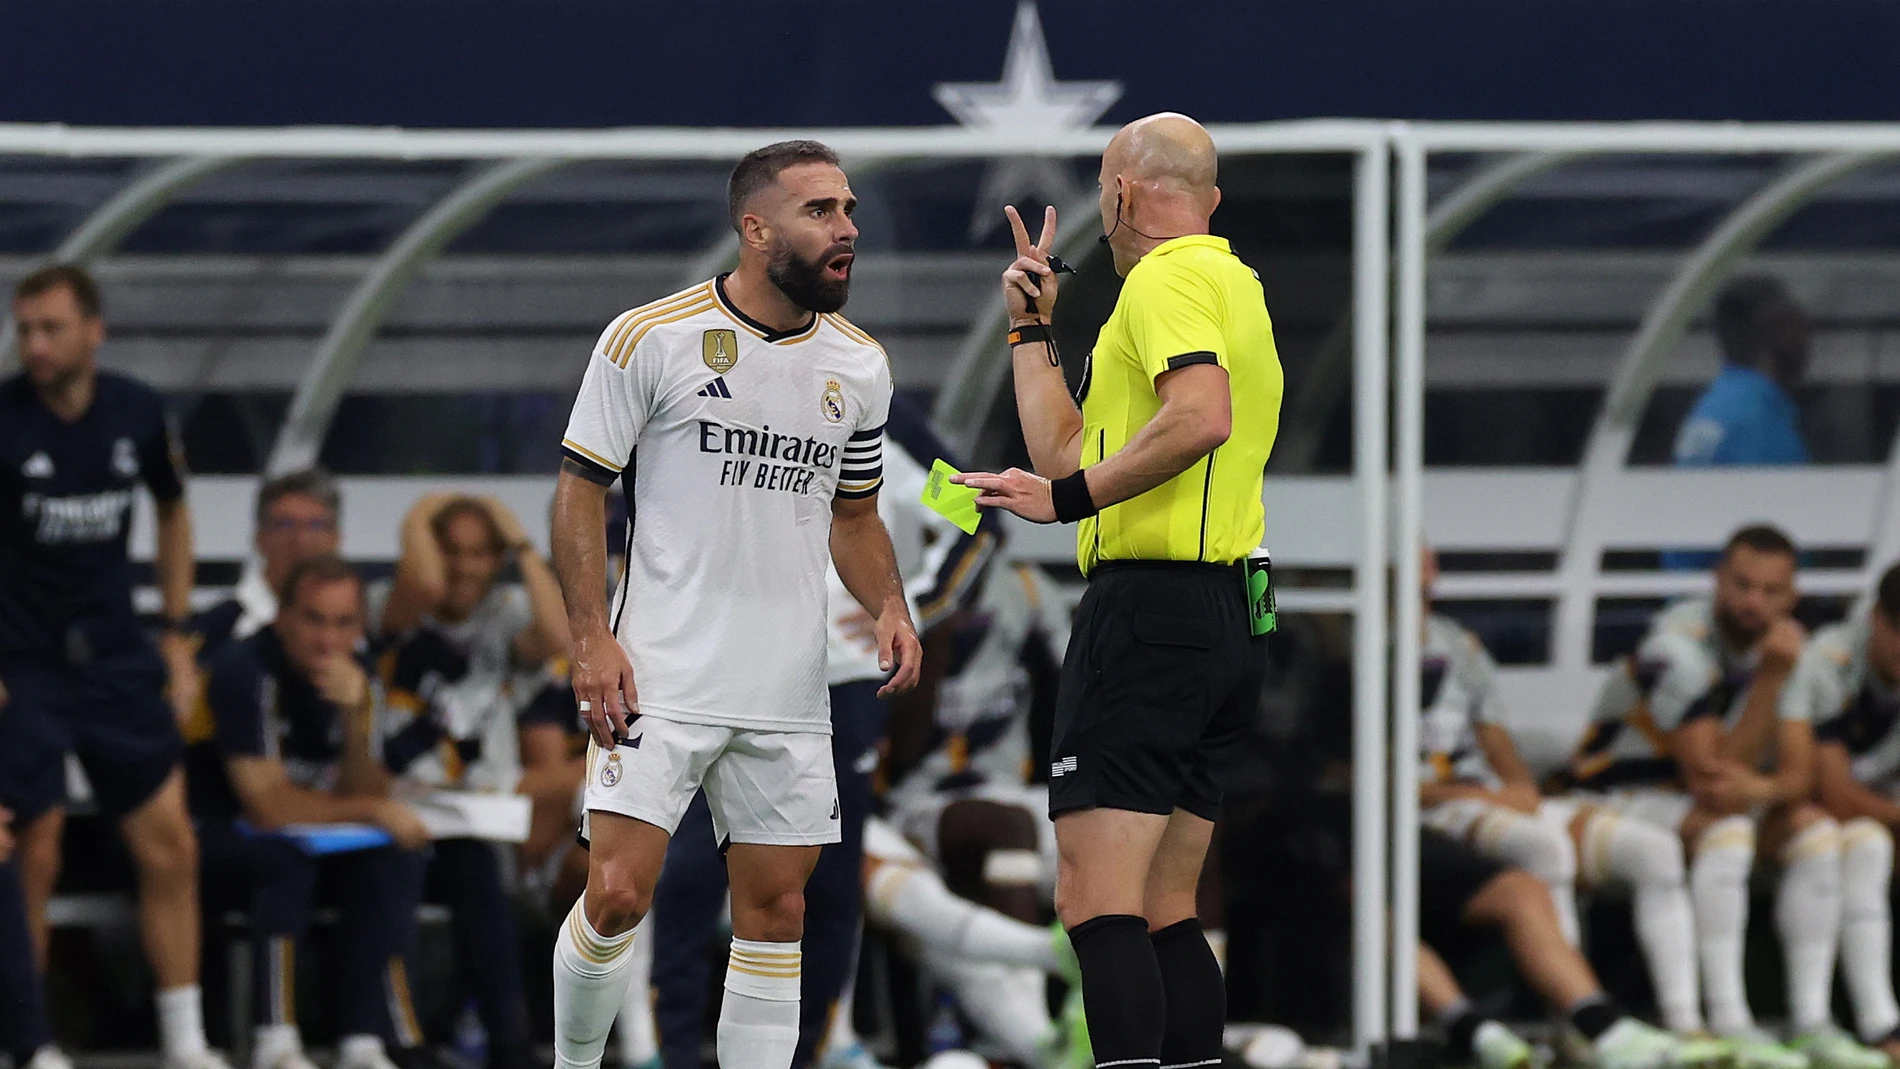 Arlington (United States), 29/07/2023.- Real Madrid Dani Carvajal (L) speaks with referee Allen Chapman during the friendly soccer match between FC Barcelona and Real Madrid, in Arlington, Texas, USA, 29 July 2023. (Futbol, Amistoso) EFE/EPA/ADAM DAVIS